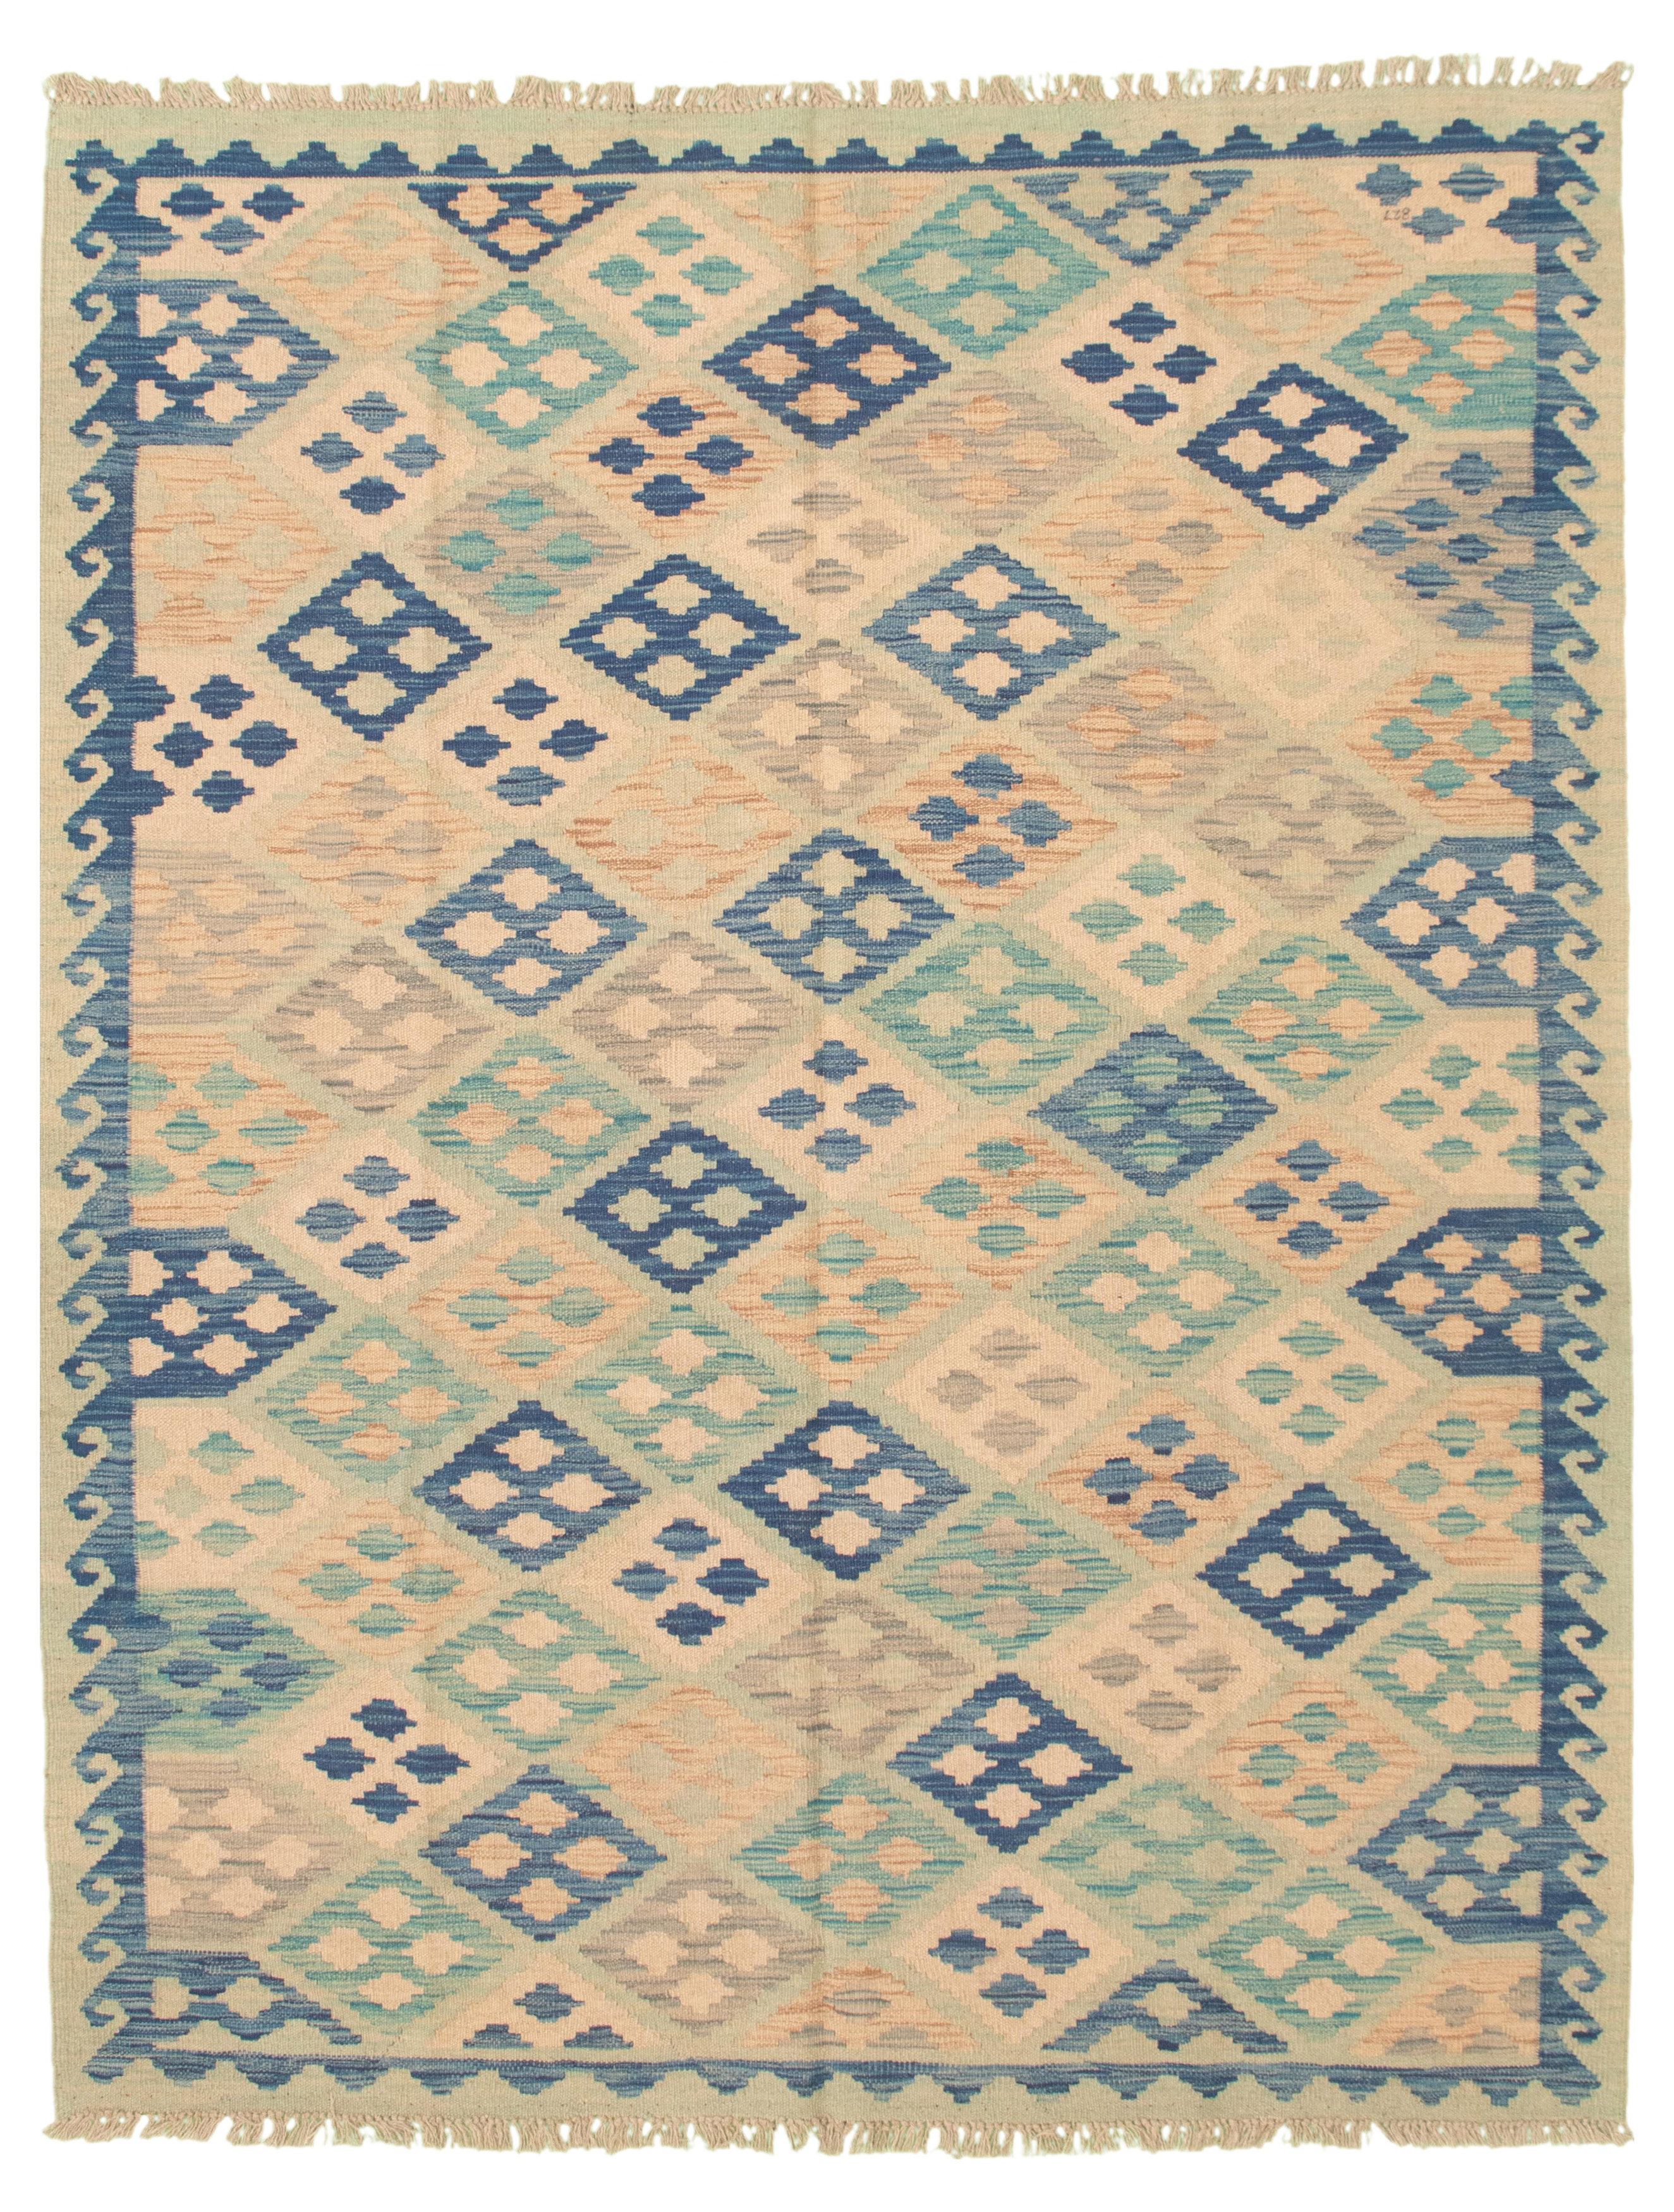 Hand woven Bold and Colorful  Cream Wool Kilim 5'10" x 7'10" Size: 5'10" x 7'10"  